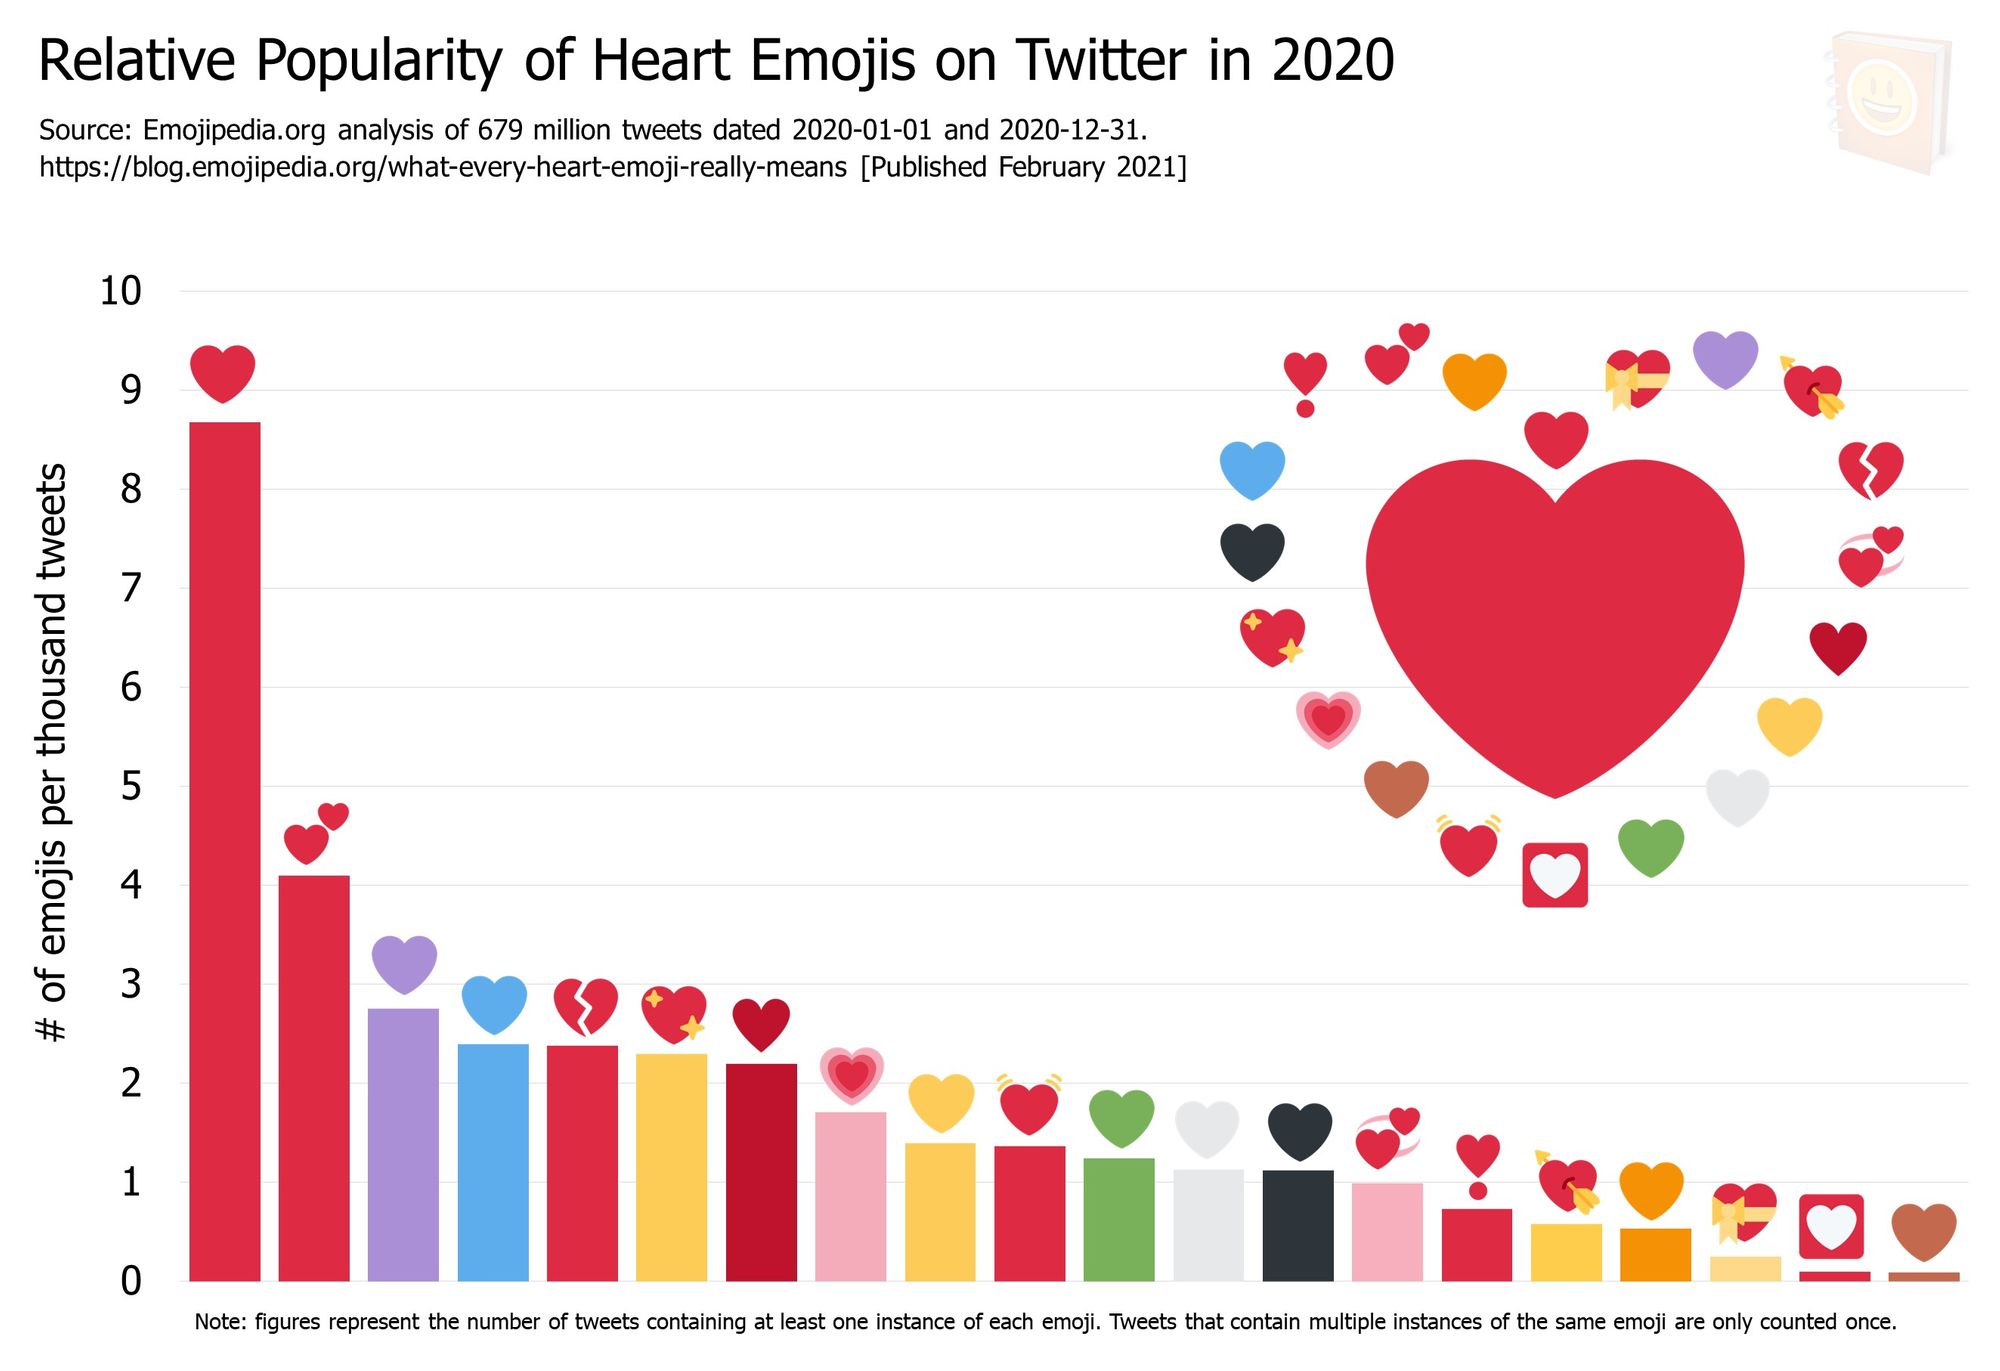 what does pink heart emoji mean